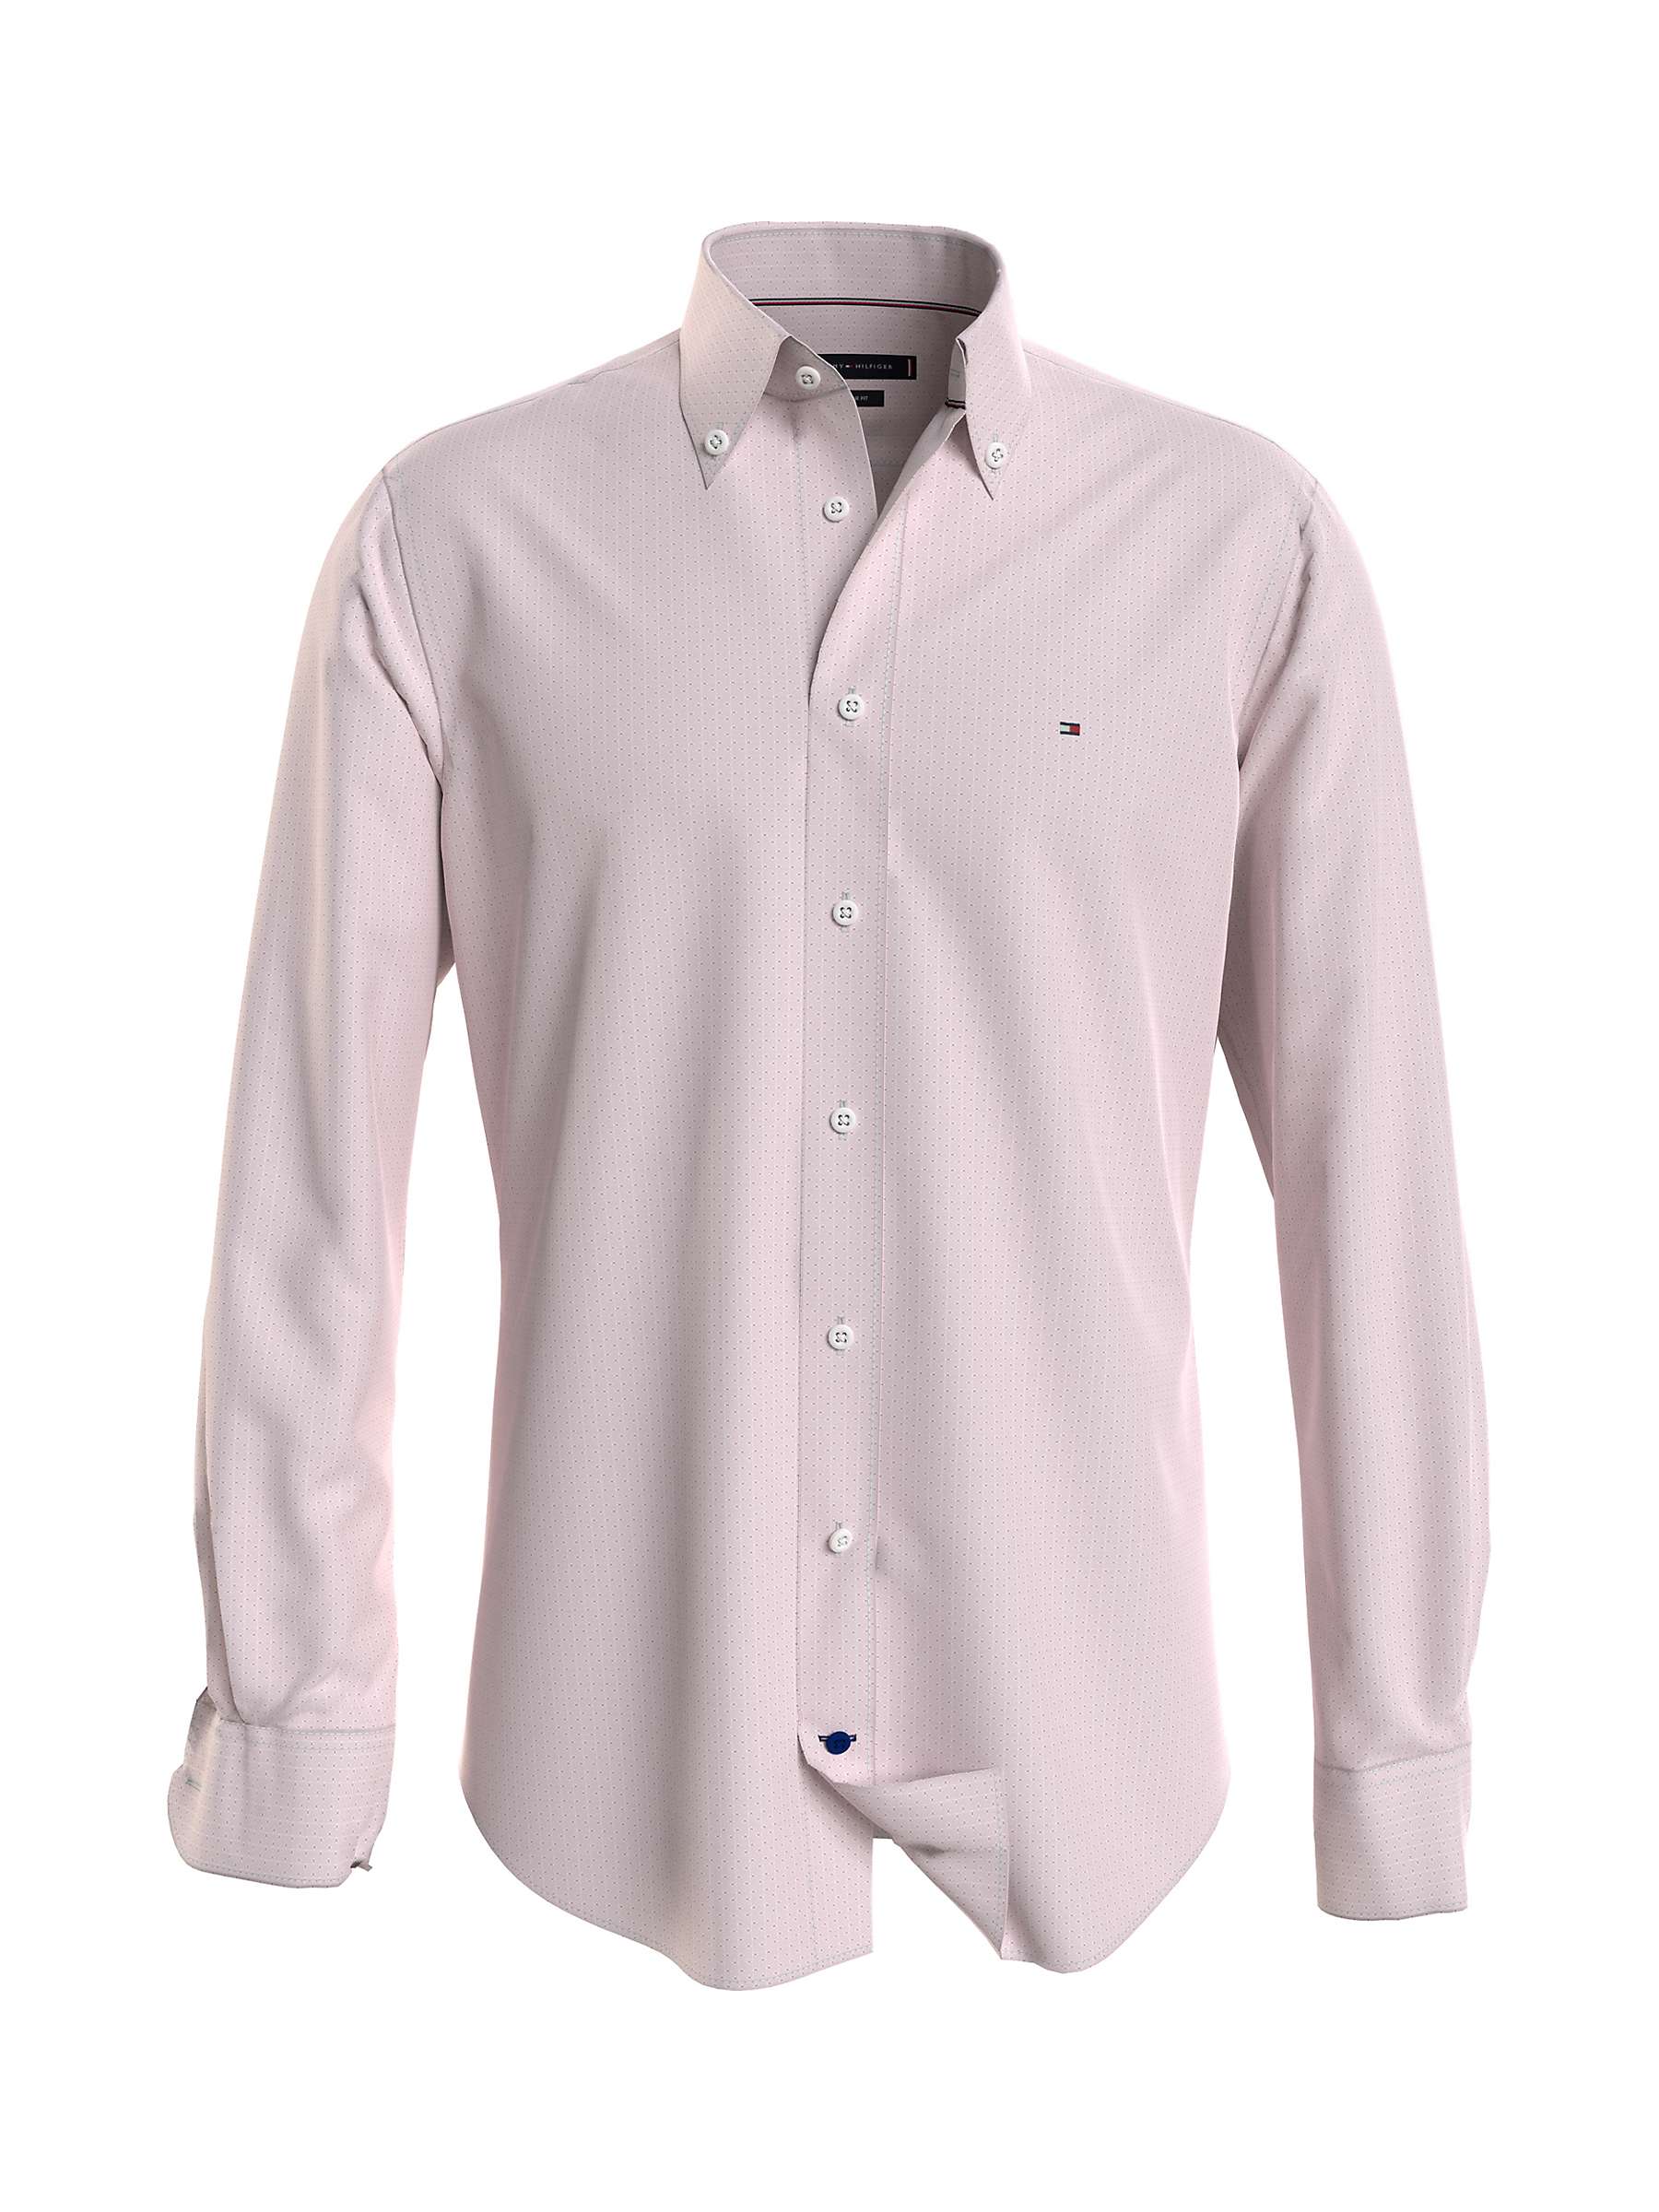 Buy Tommy Hilfiger Dobby Cotton Oxford Shirt Online at johnlewis.com